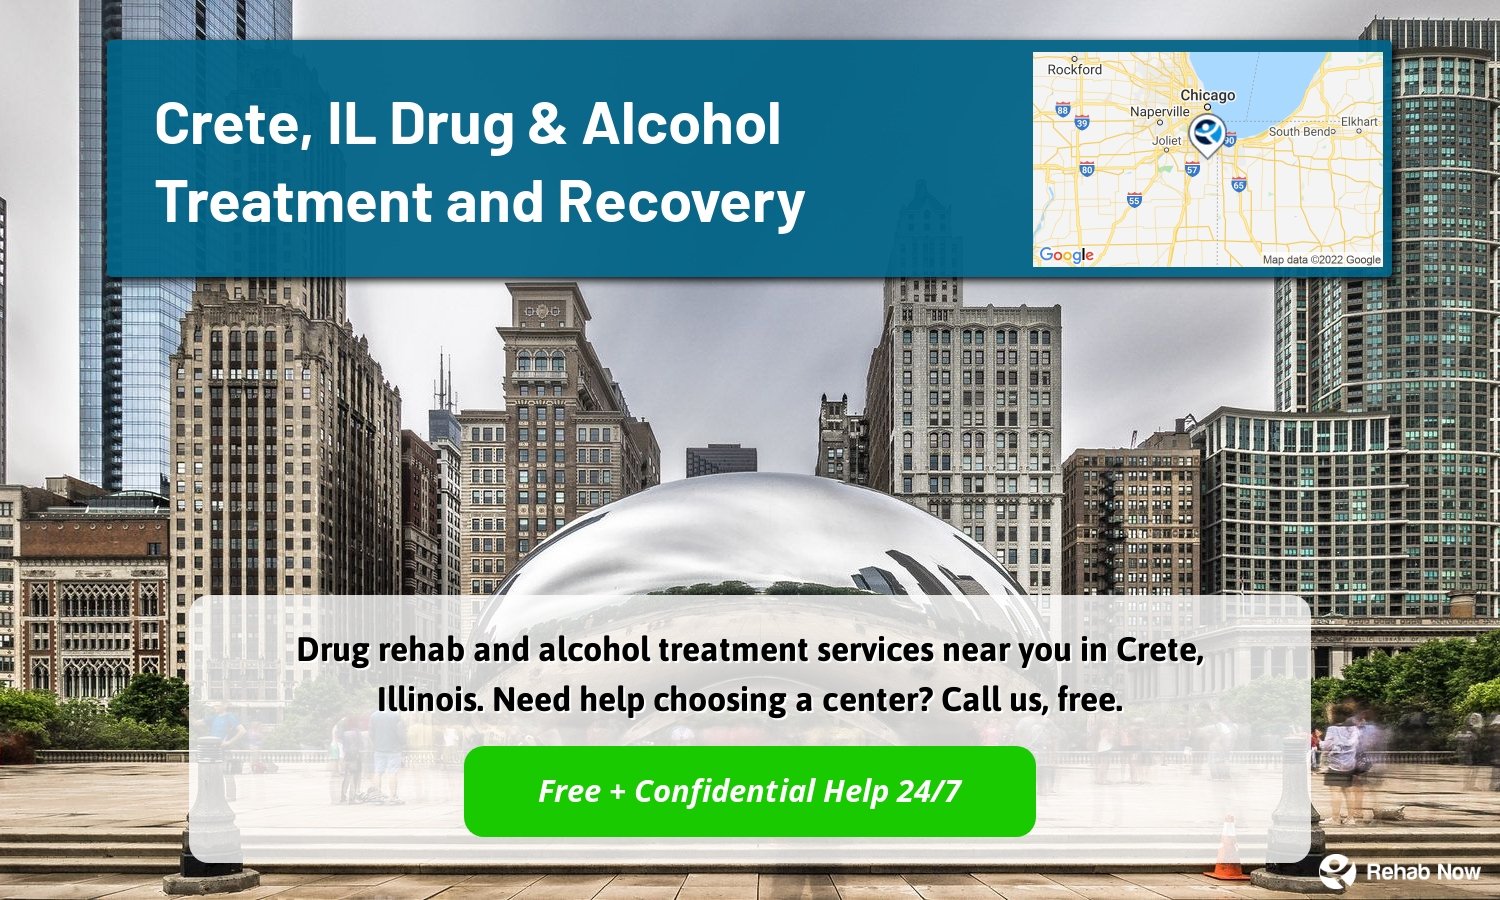 Drug rehab and alcohol treatment services near you in Crete, Illinois. Need help choosing a center? Call us, free.